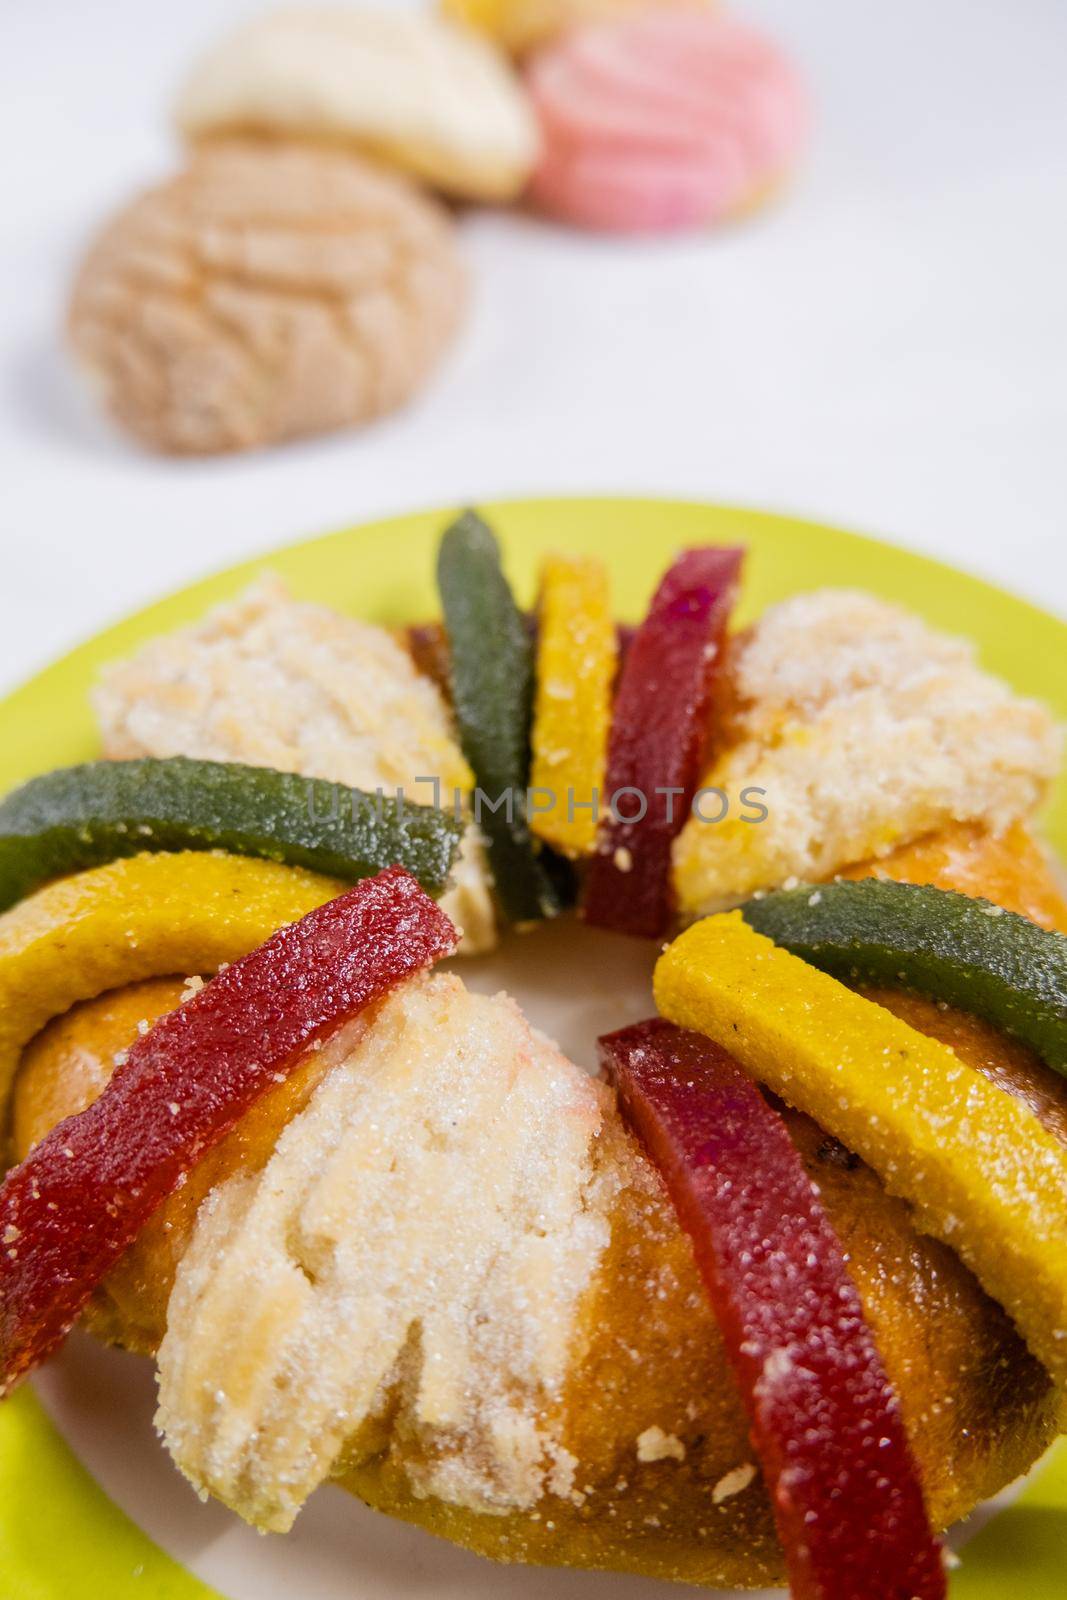 Colorful kings day bread on yellow plate with sweet bread known as concha as background. Classic round Mexican bread with fruit paste slices above white table. Traditional Mexican desserts